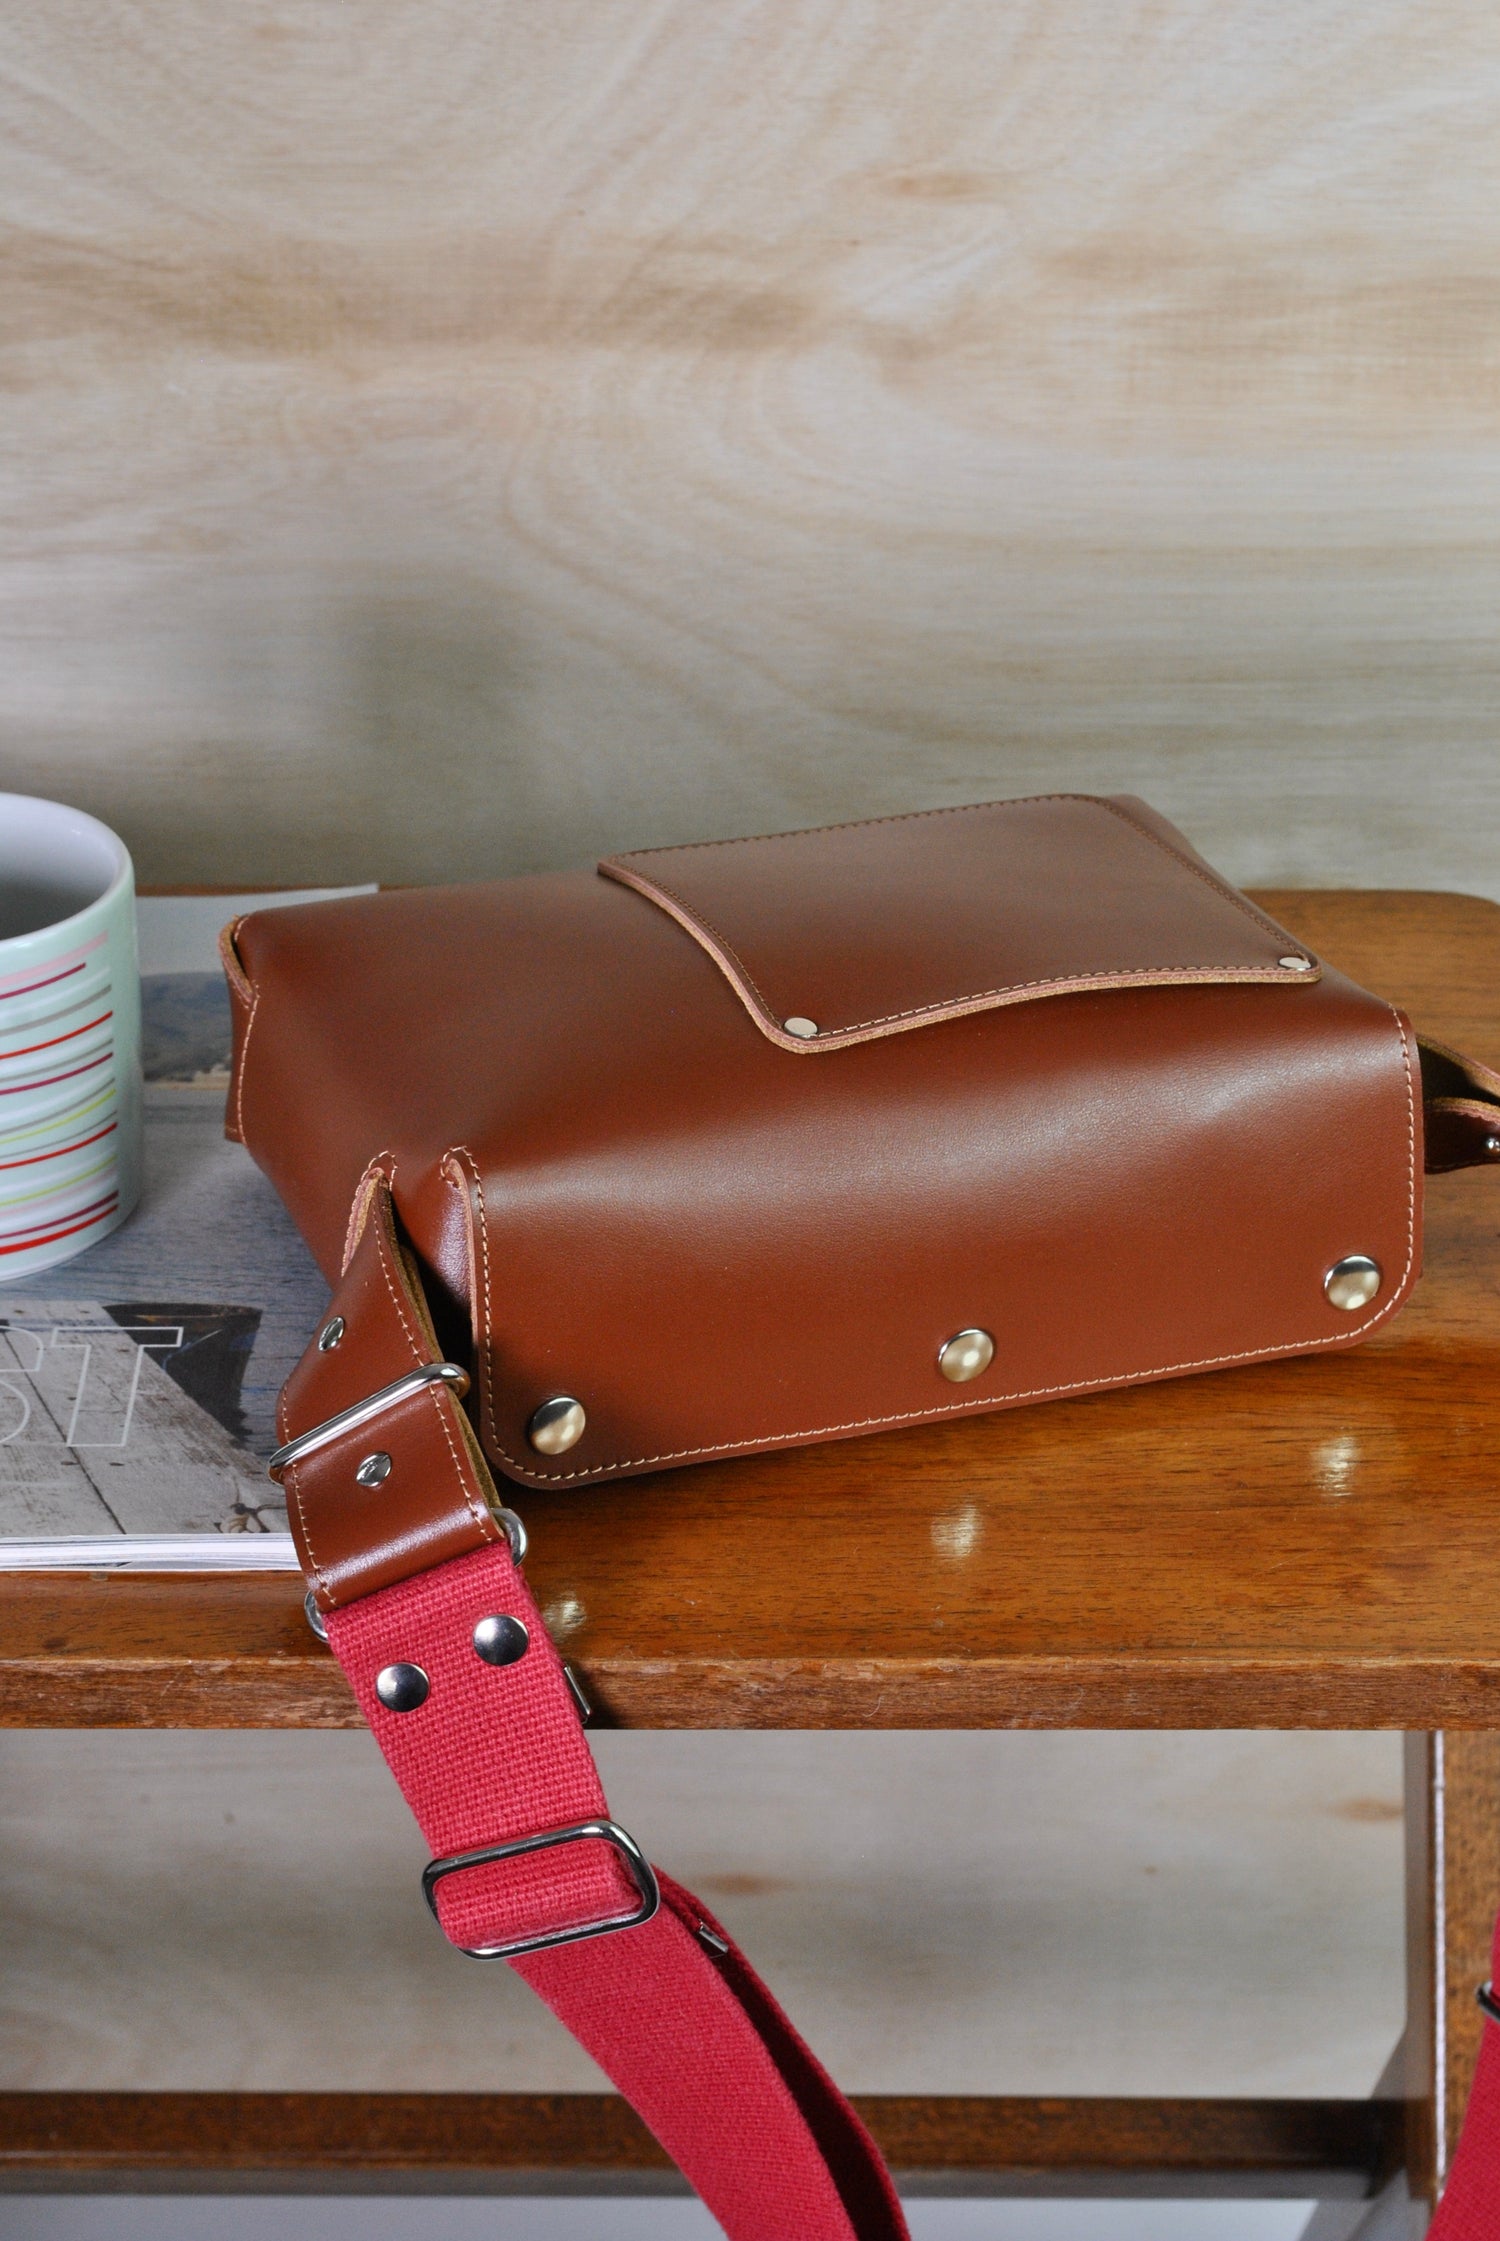 Tan & Red Leather Crossbody Bag Casual Everyday Carry